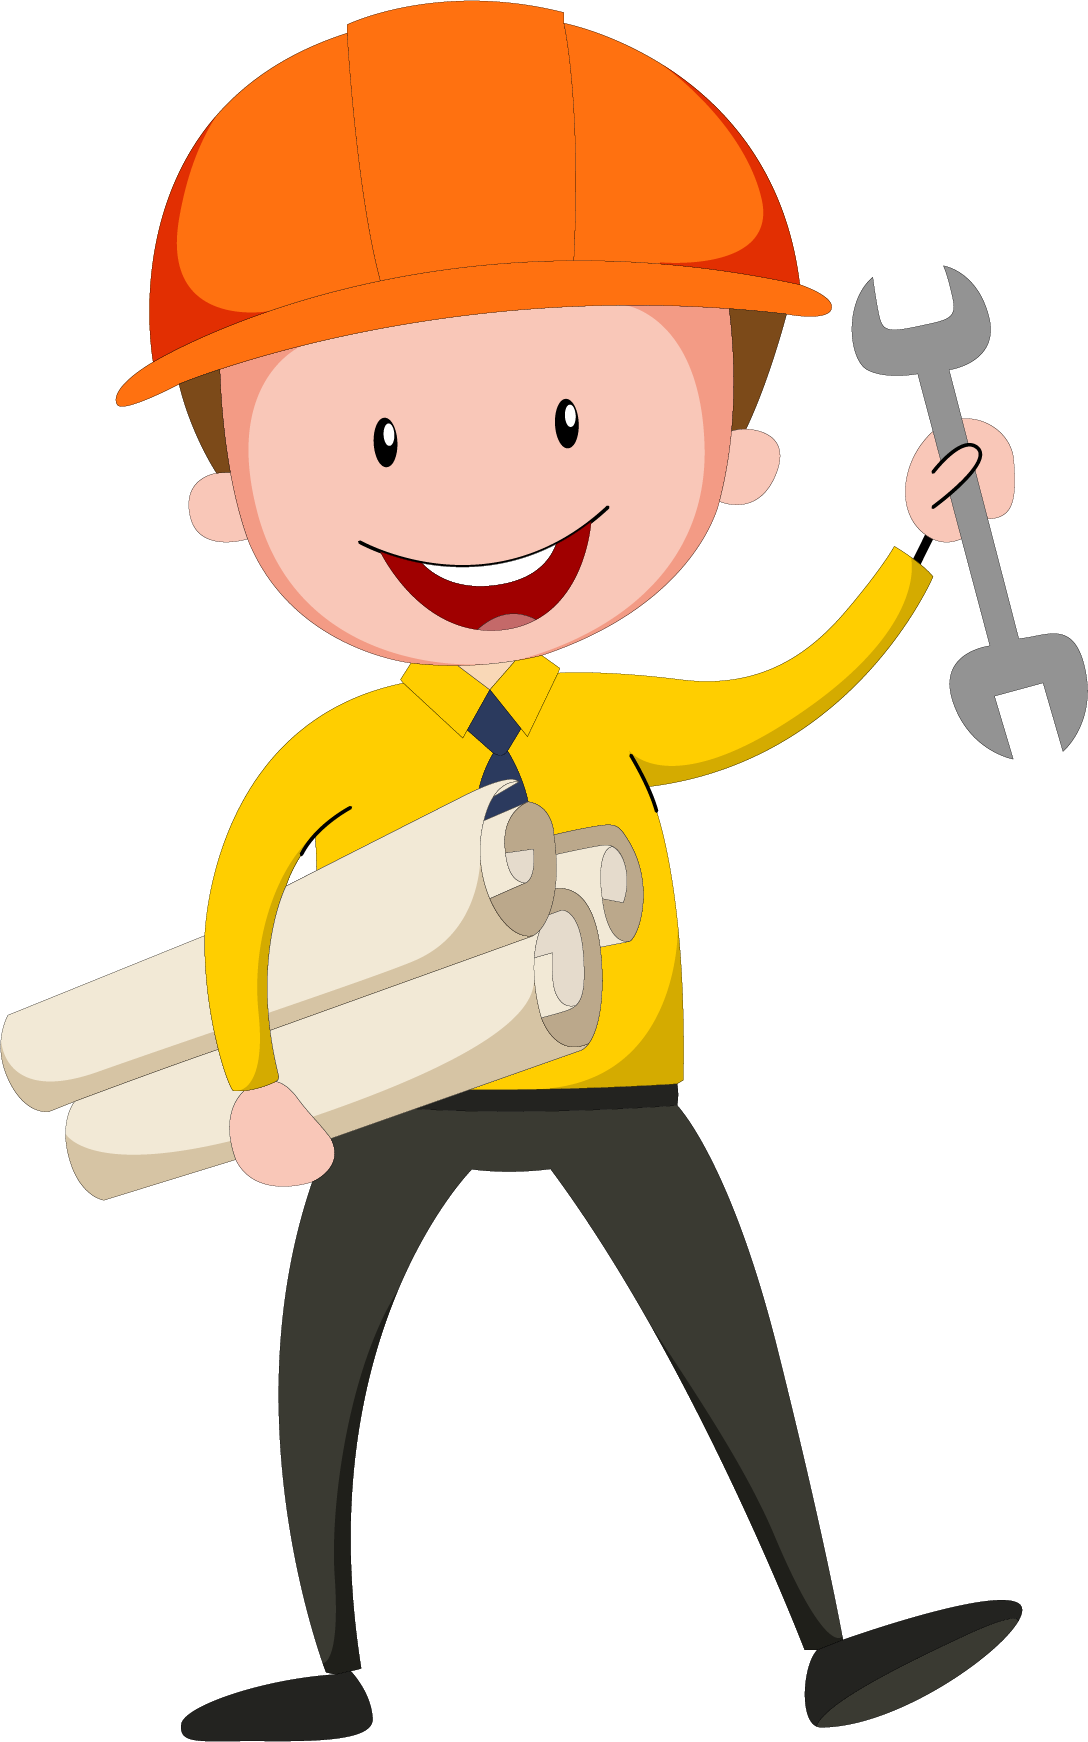 Civil design wearing a. Engineering clipart professional engineer